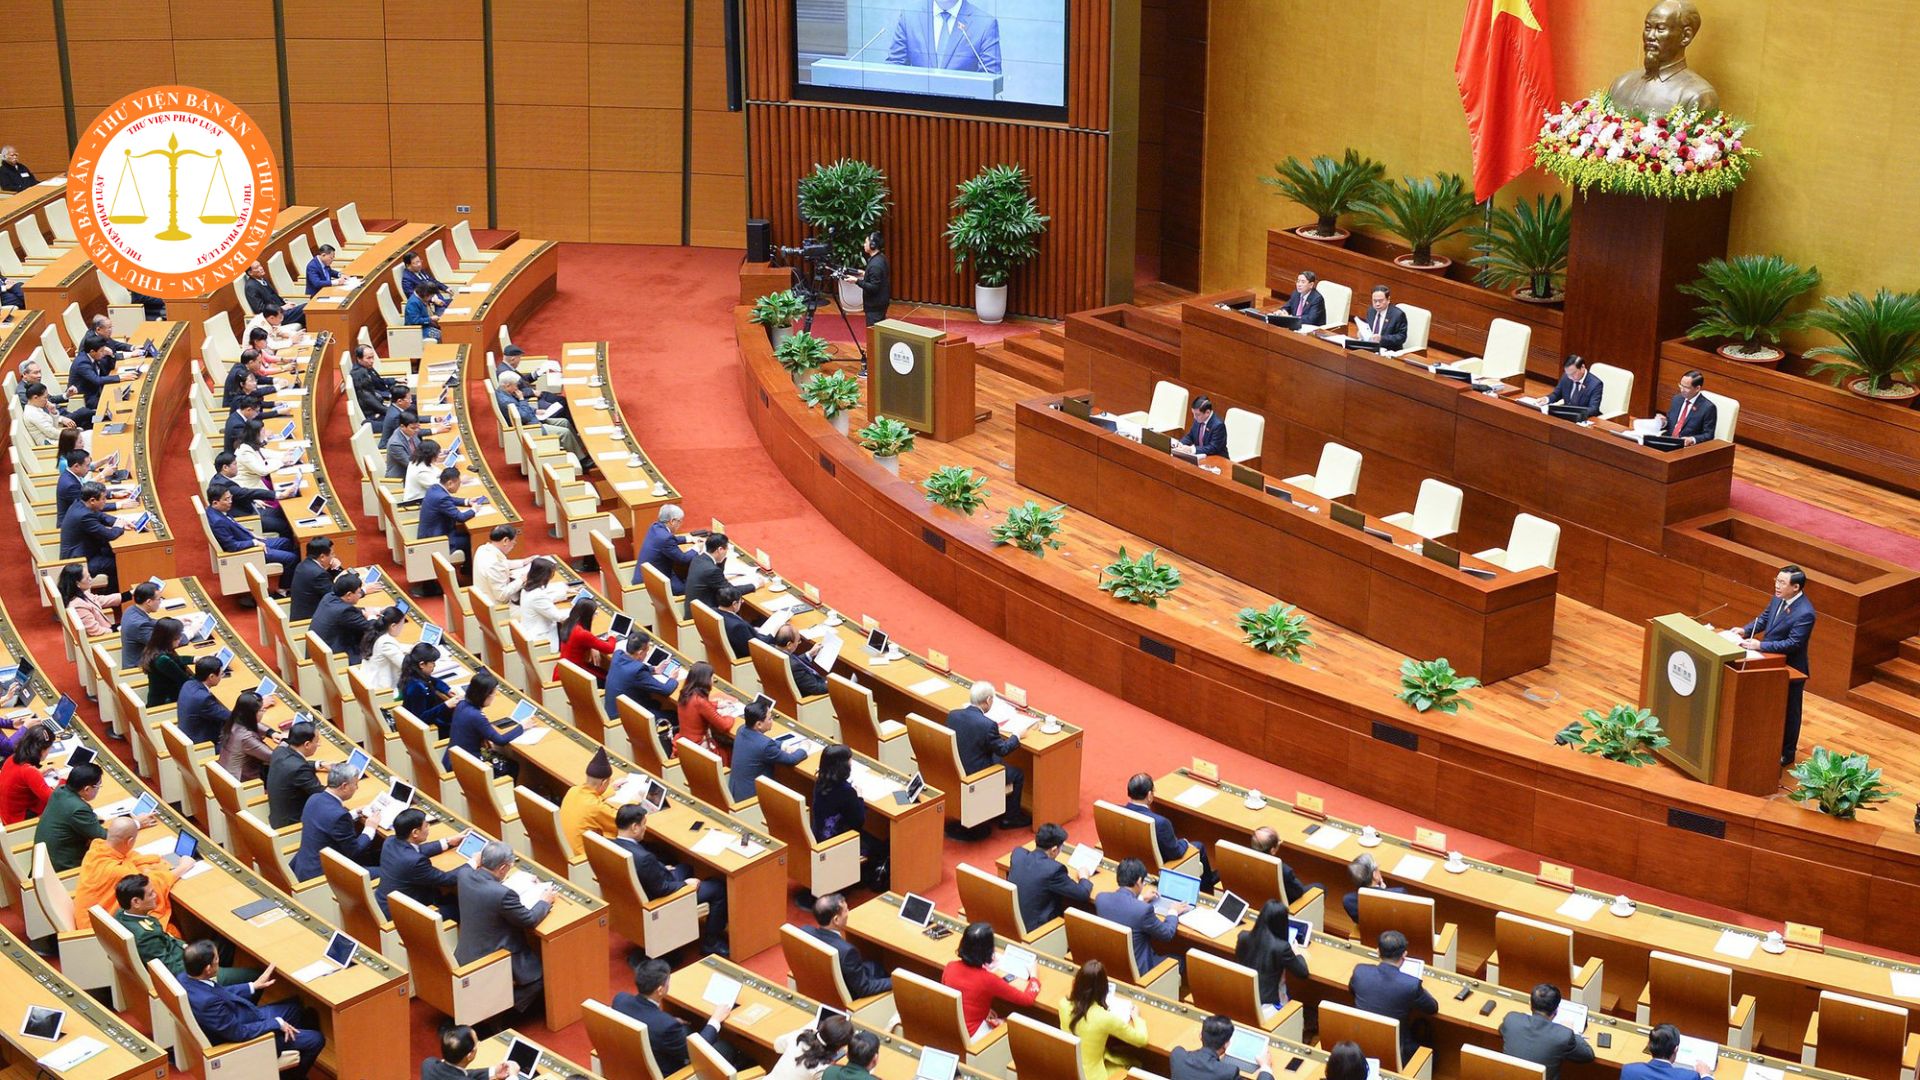 Organizational structure of the National Assembly of Vietnam